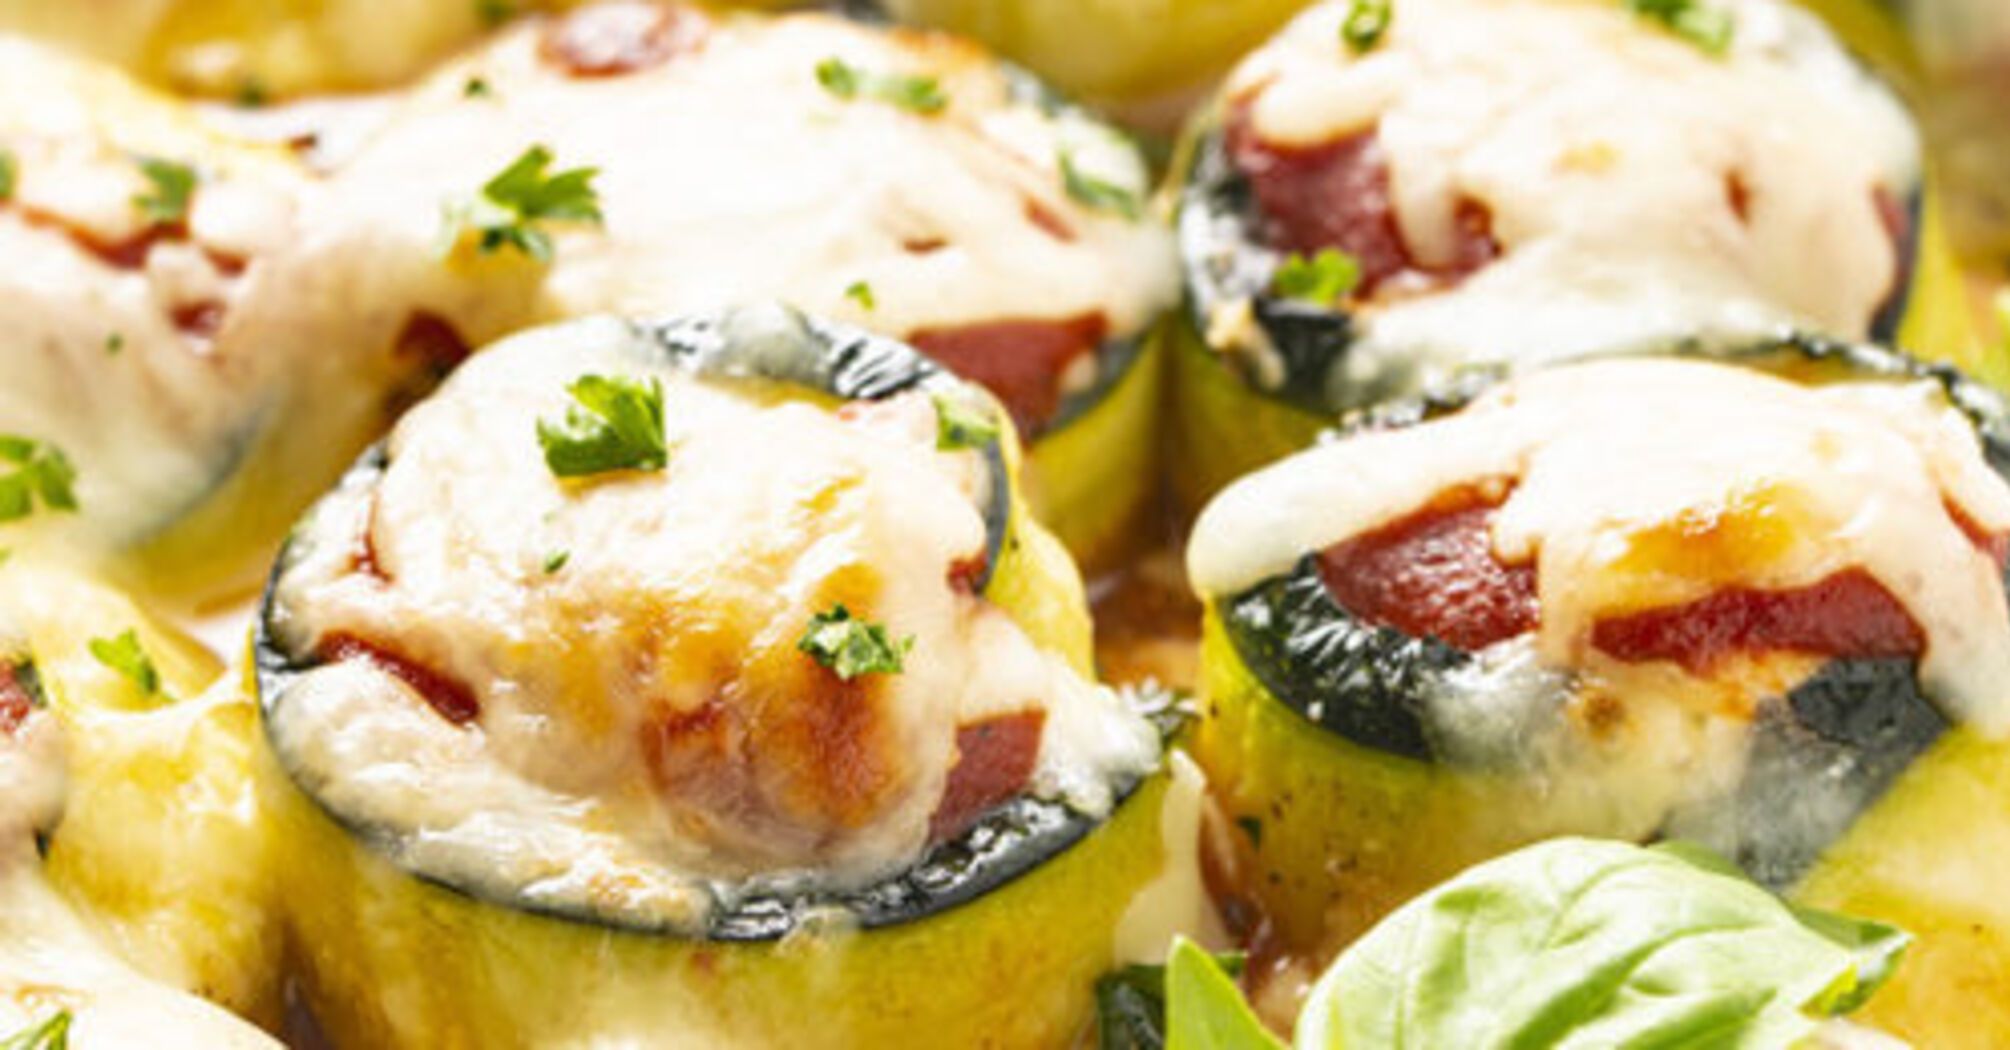 Simple zucchini rolls with cheese: how to prepare this quick seasonal dish